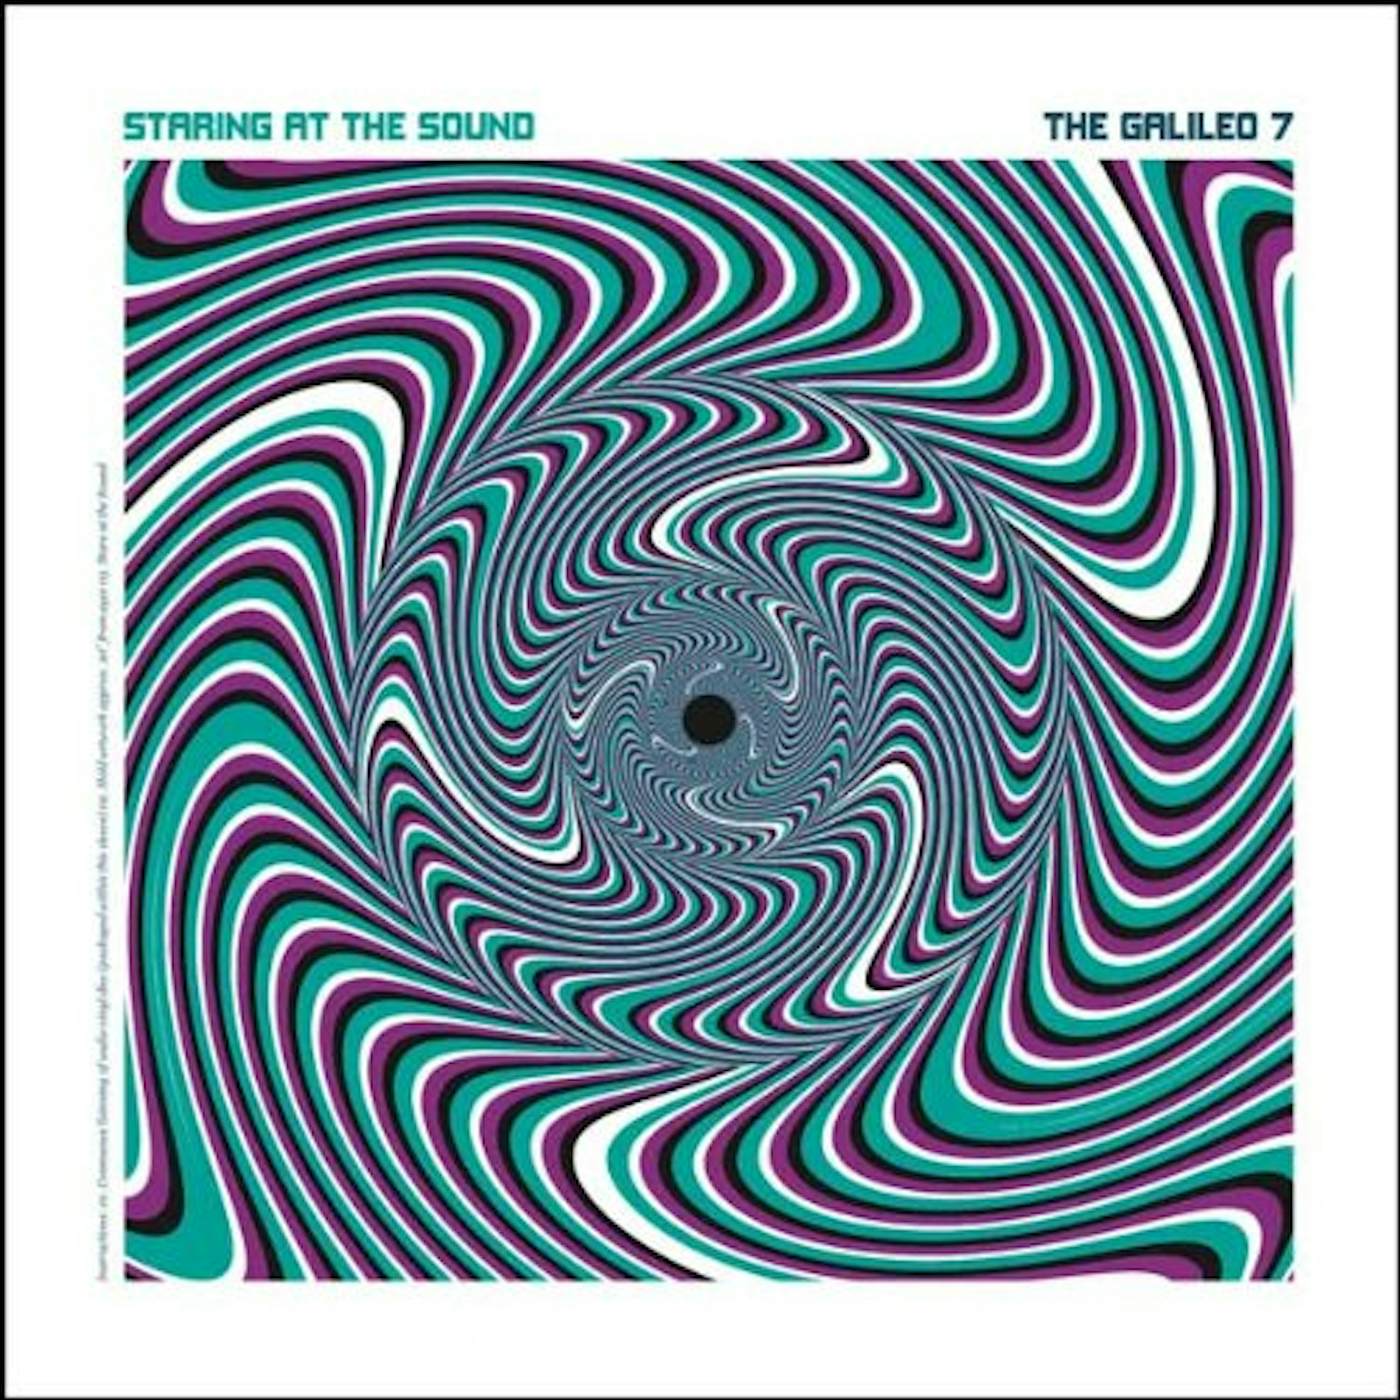 The Galileo 7 STARING AT THE SOUND Vinyl Record - UK Release